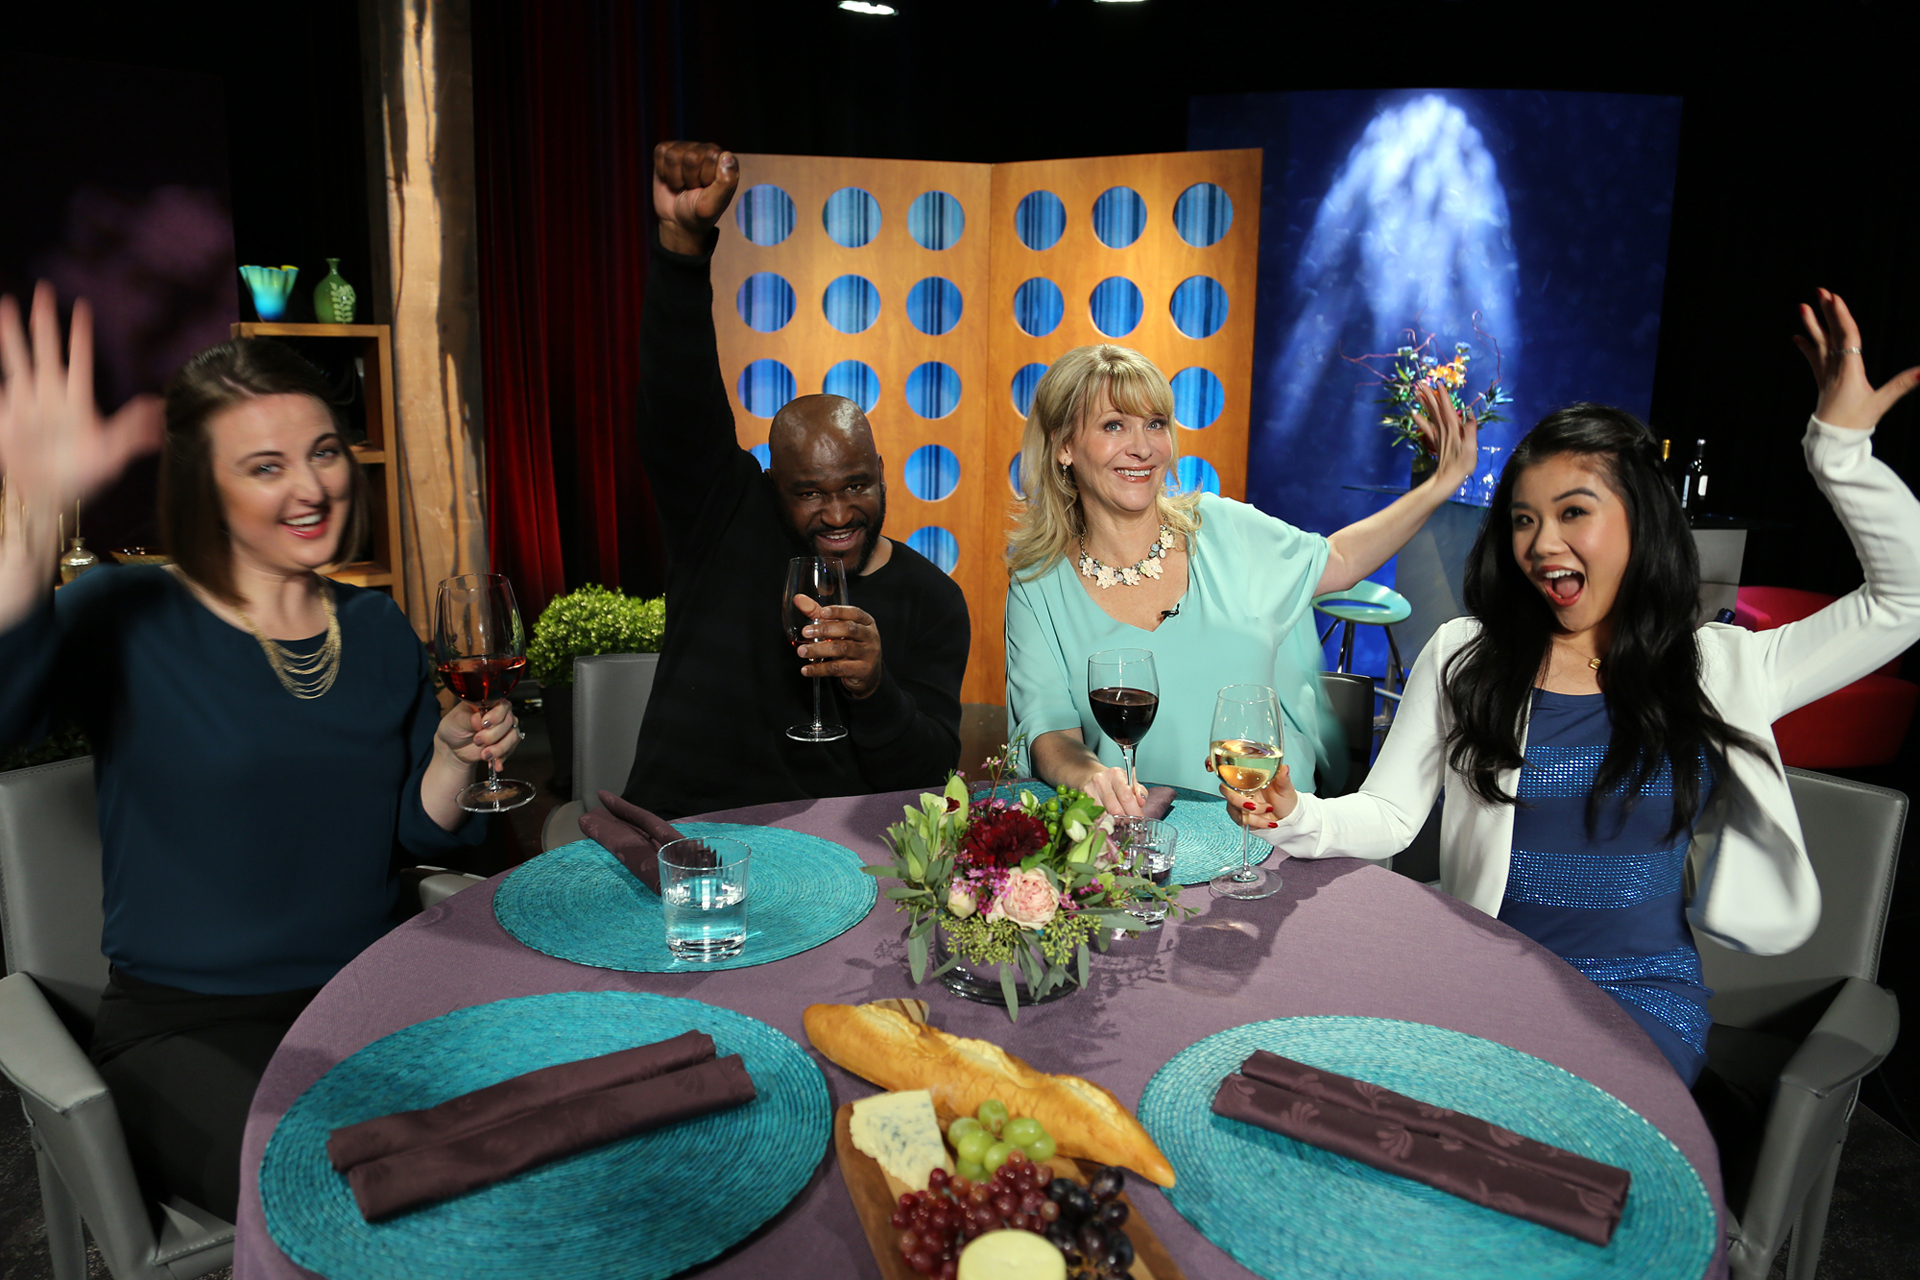 Host Leslie Sbrocco and guests having fun on the set of season 12 episode 3.